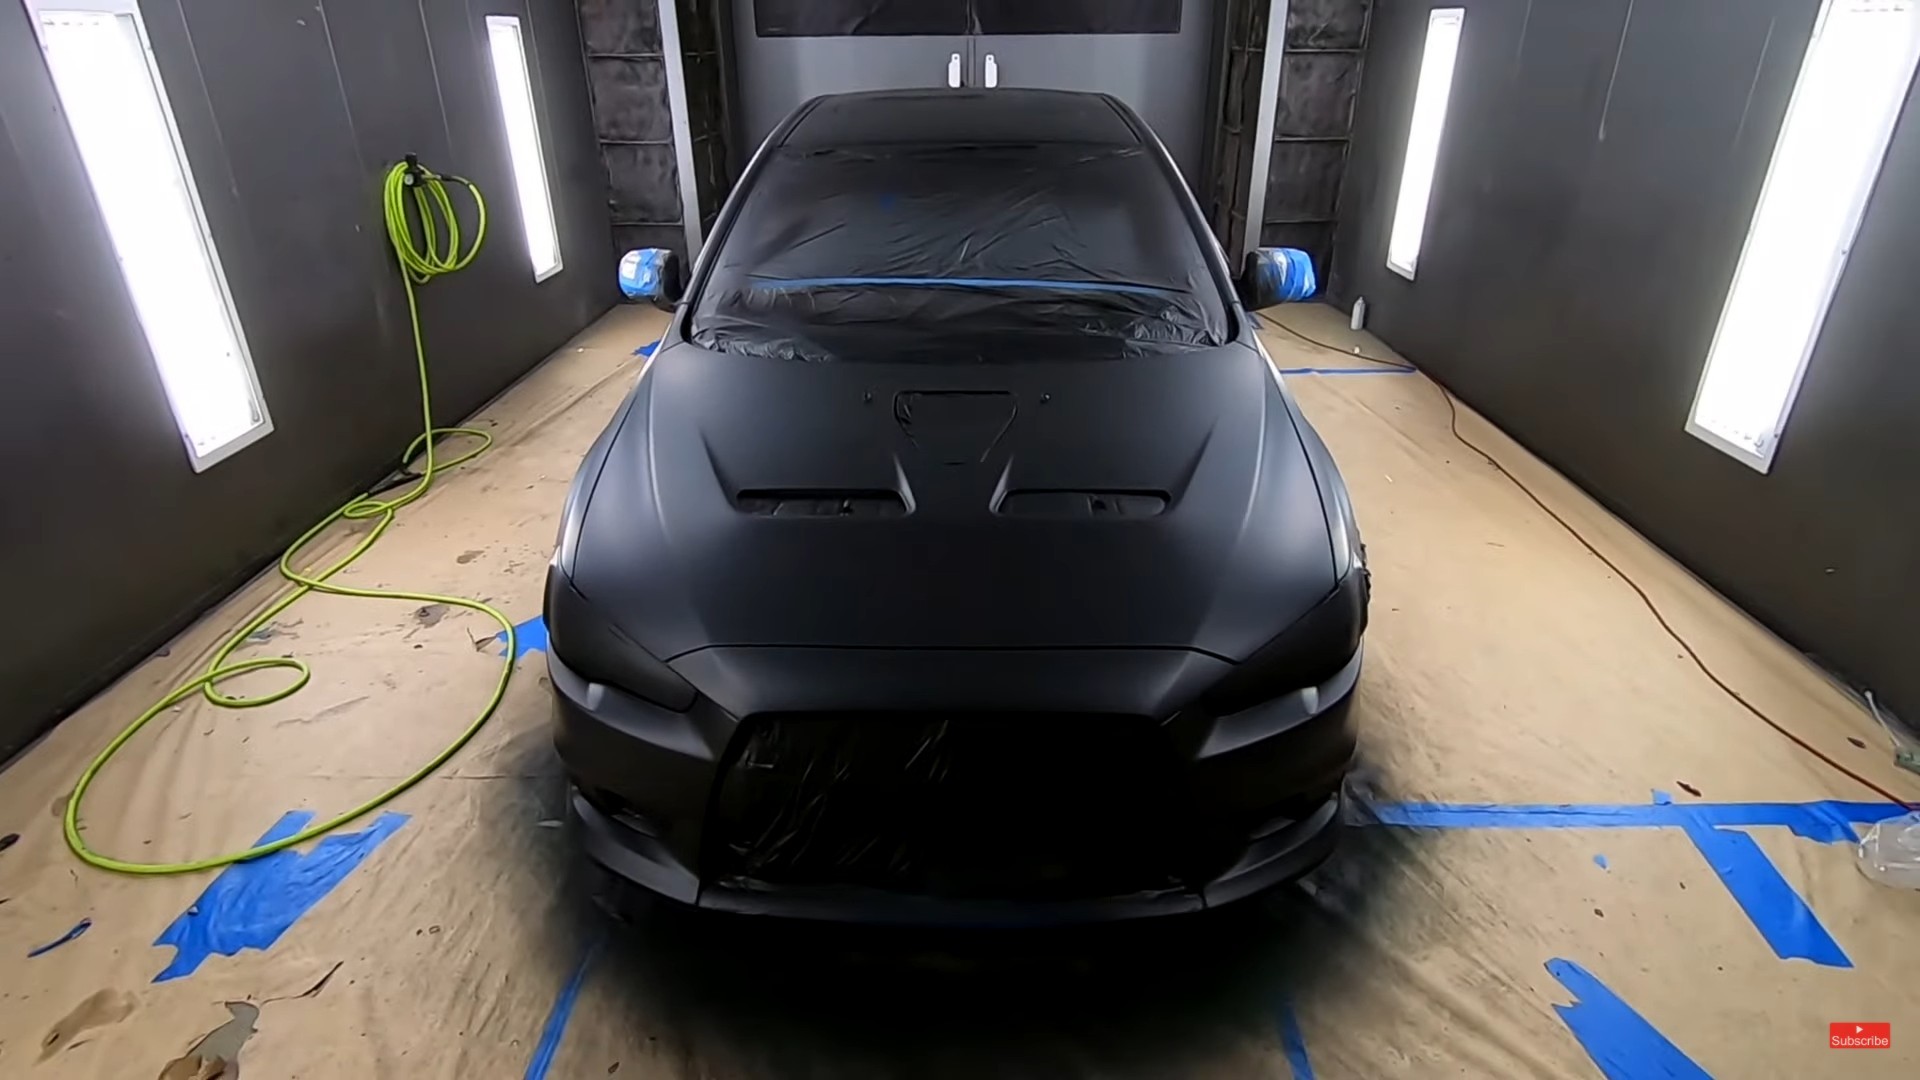 This Is What Painting Your Car in the Darkest Black Looks Like